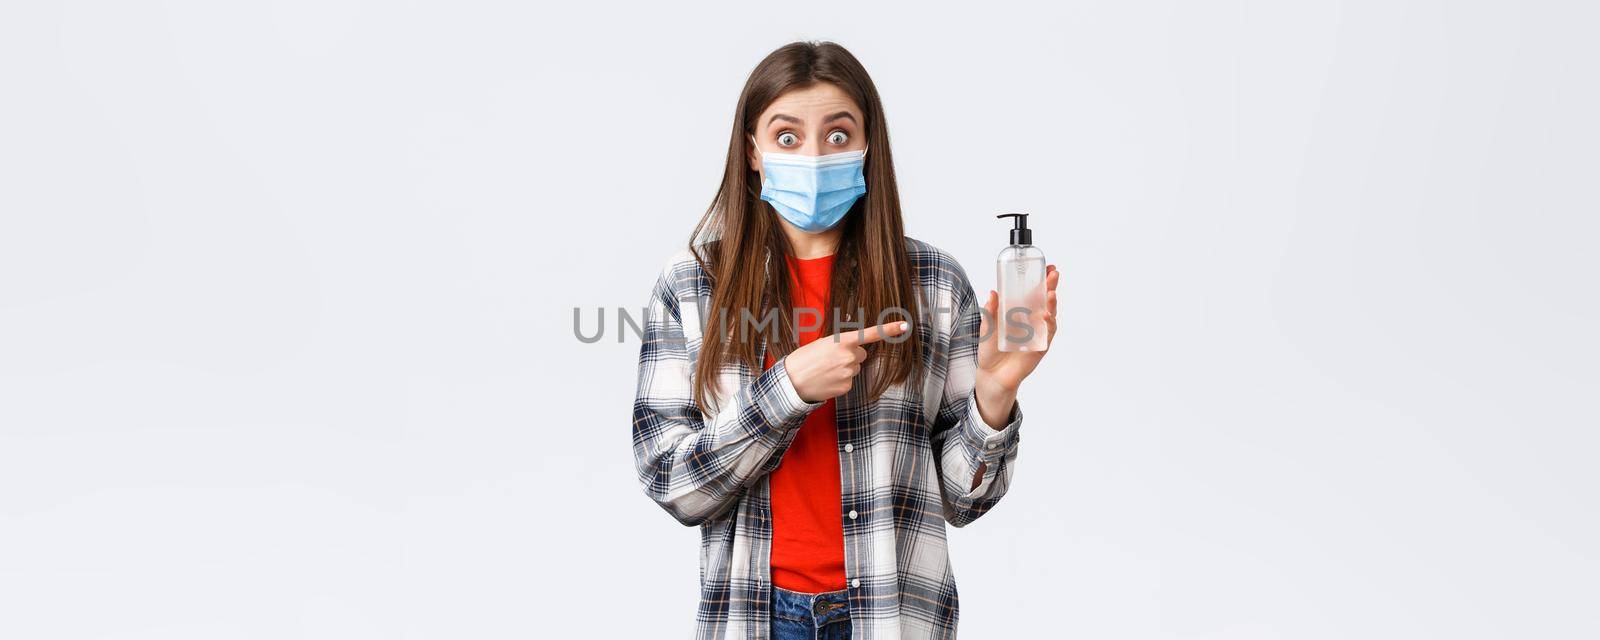 Coronavirus outbreak, leisure on quarantine, social distancing and emotions concept. Excited and astonished young woman in medical mask, pointing at hand sanitizer, recommend product by Benzoix